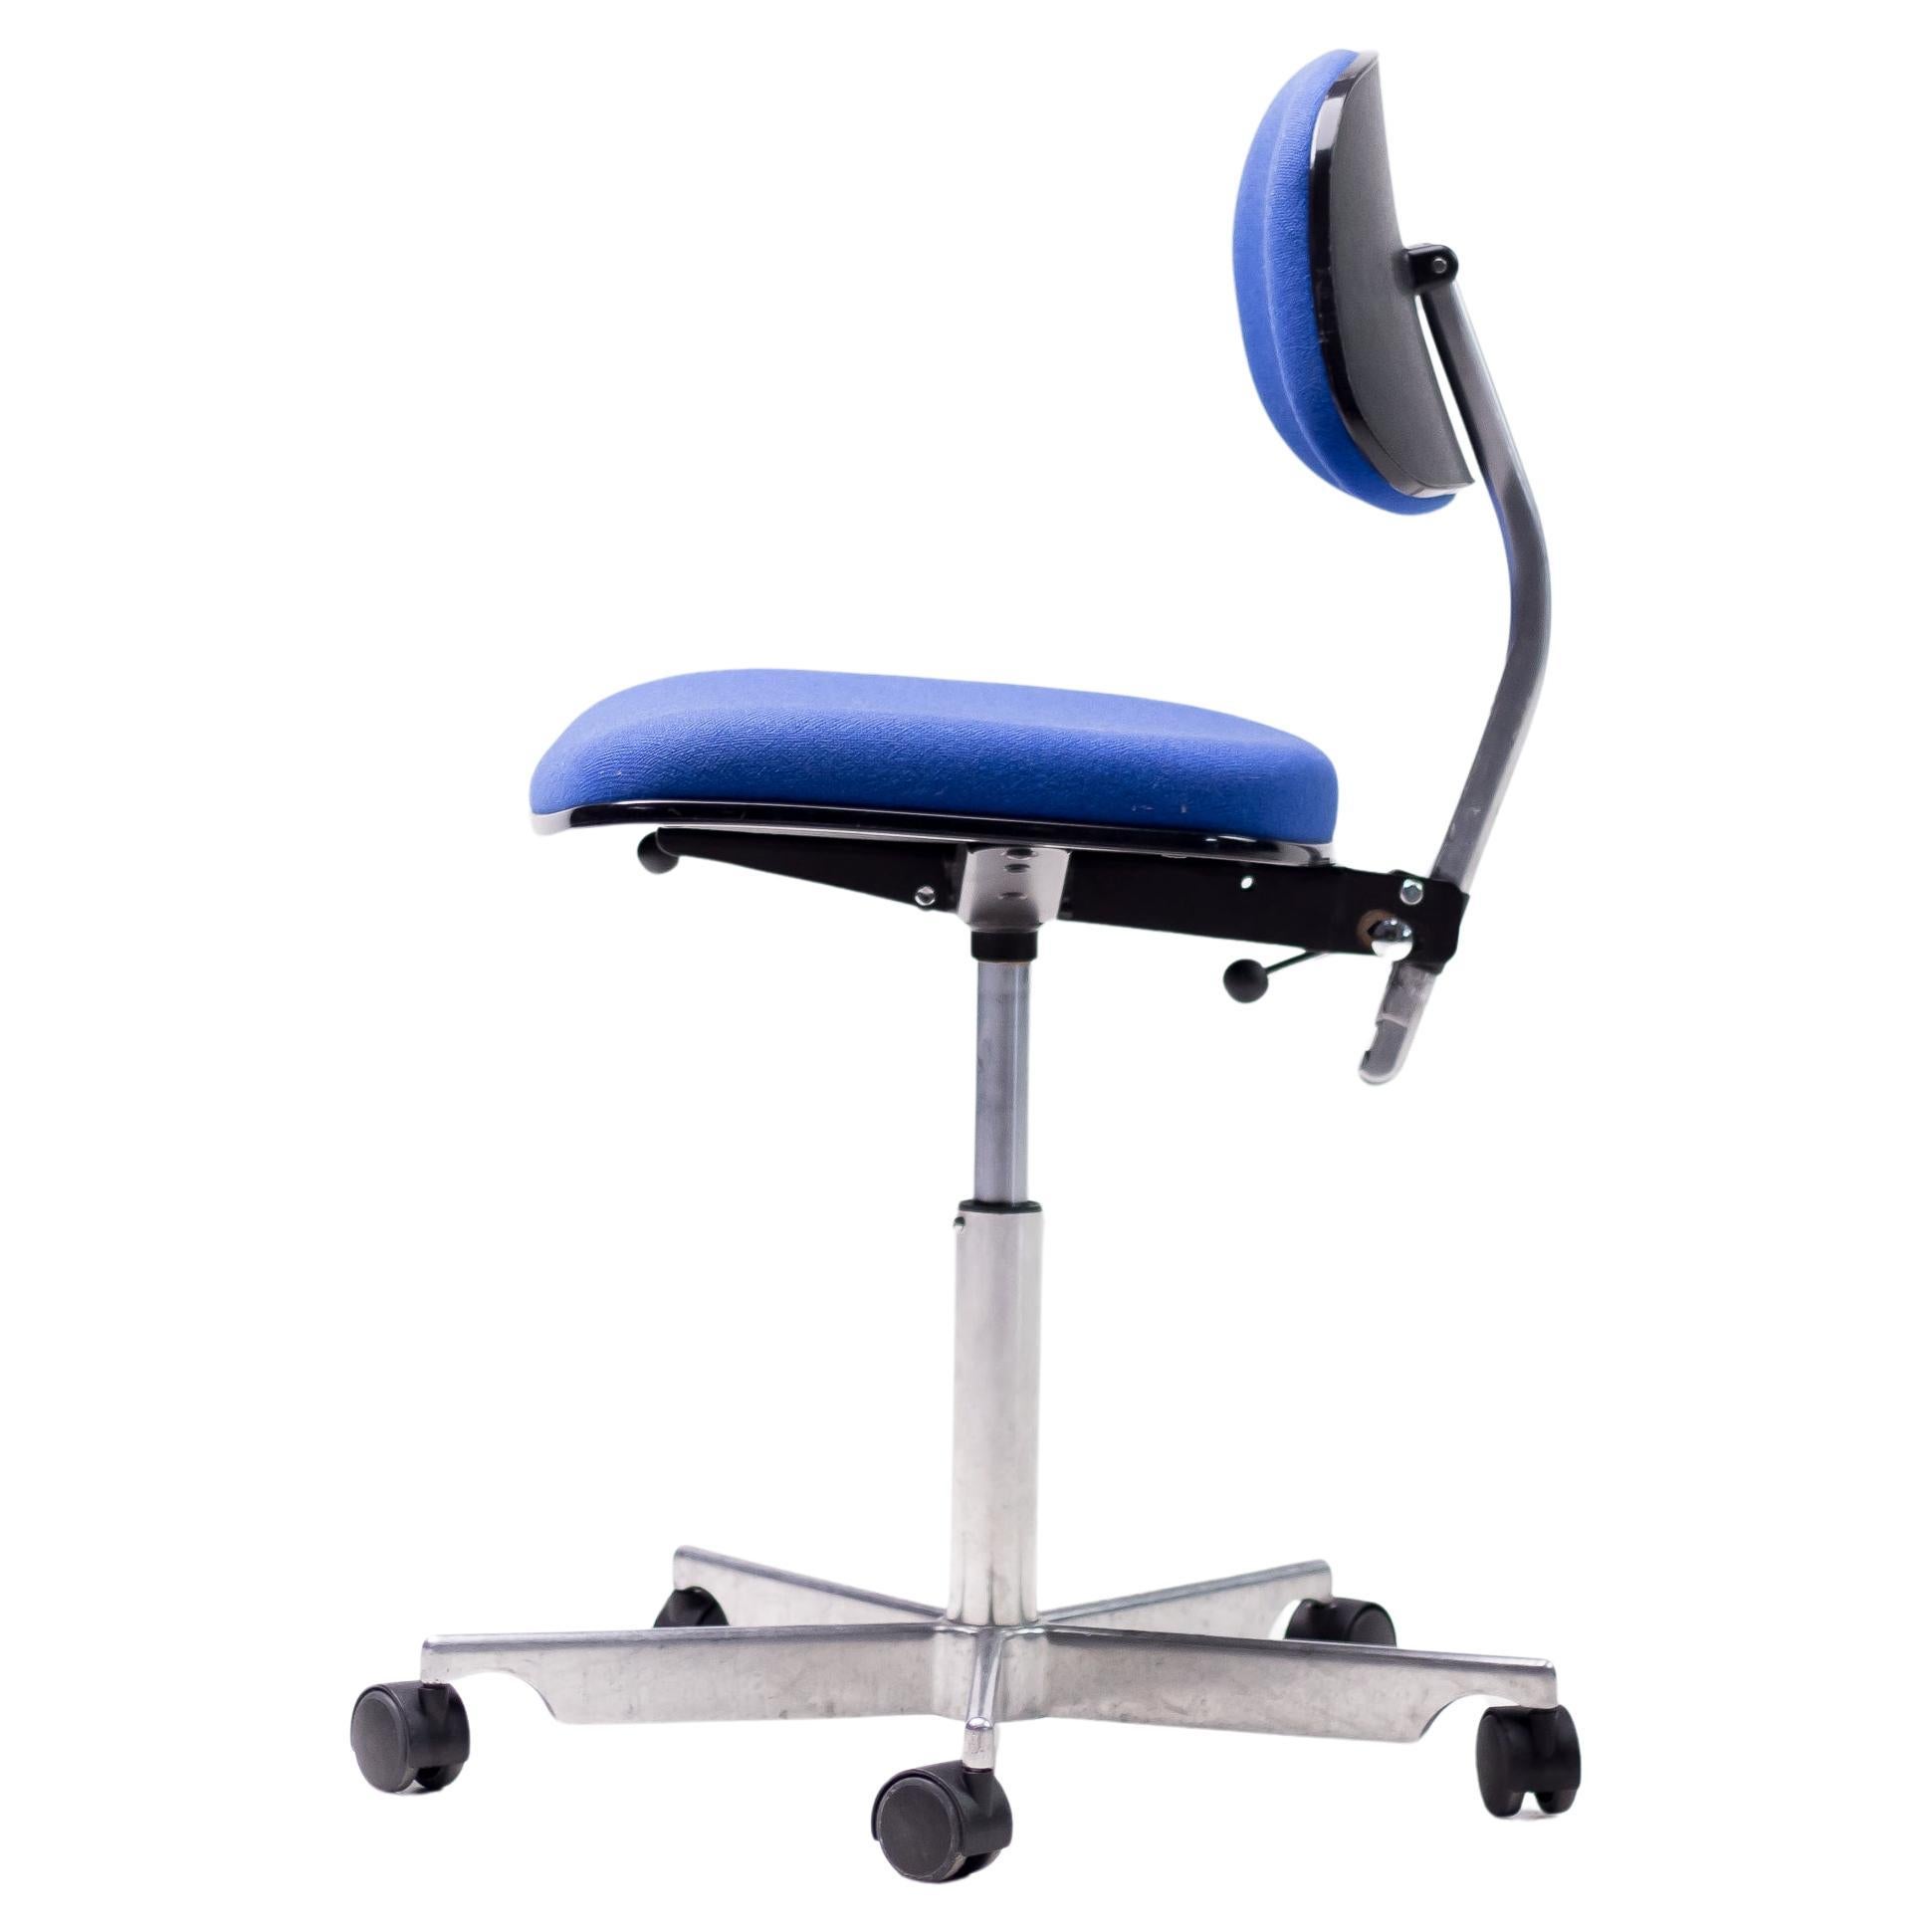 Kevi Desk Chairs For Sale